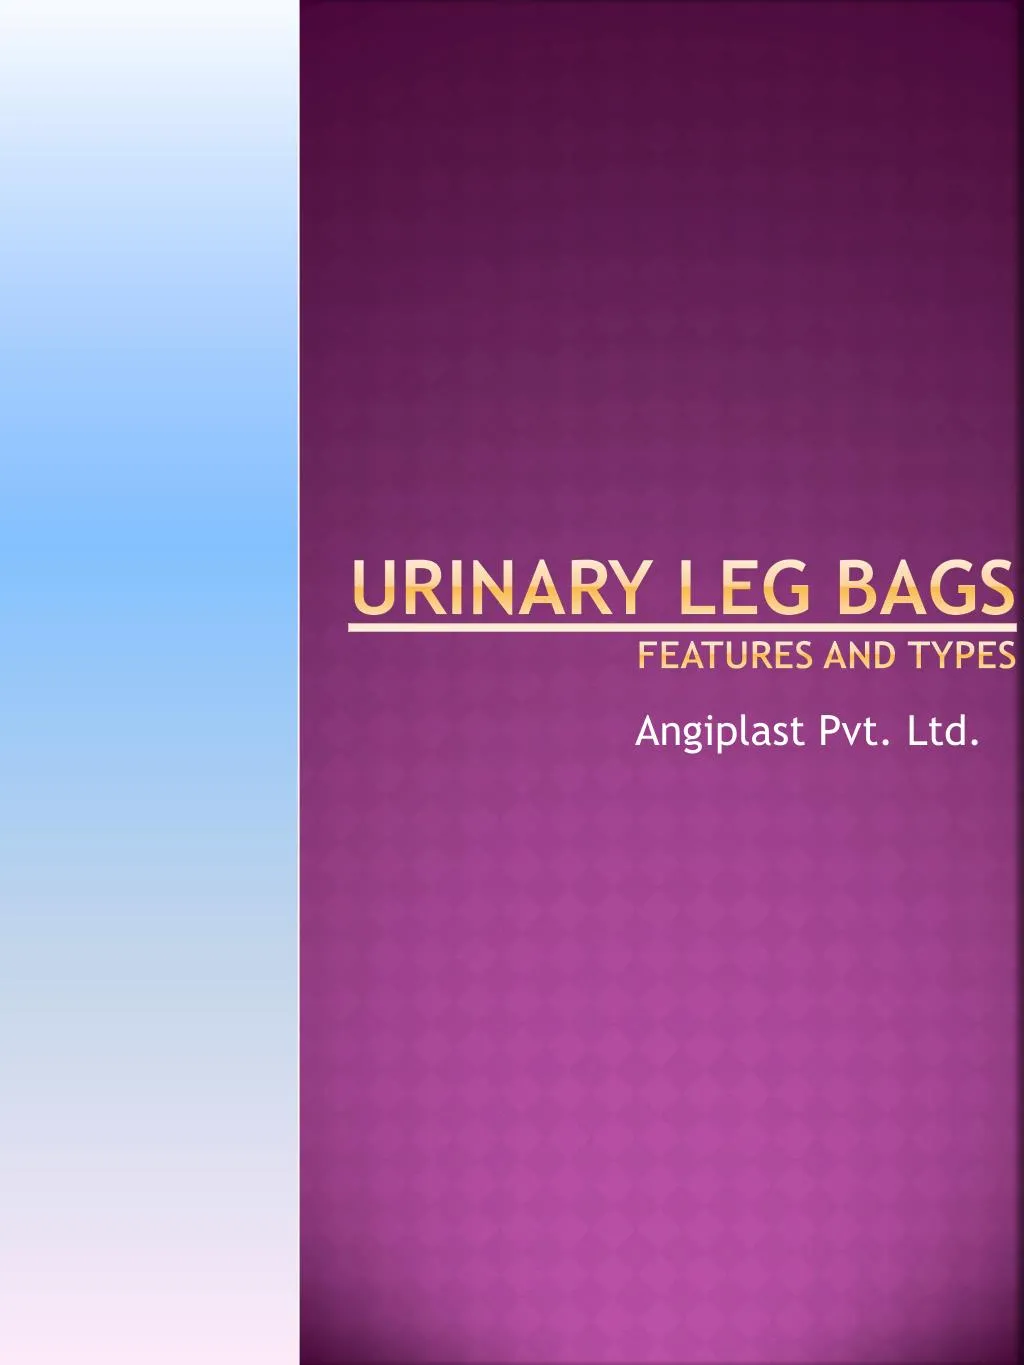 urinary leg bags features and types